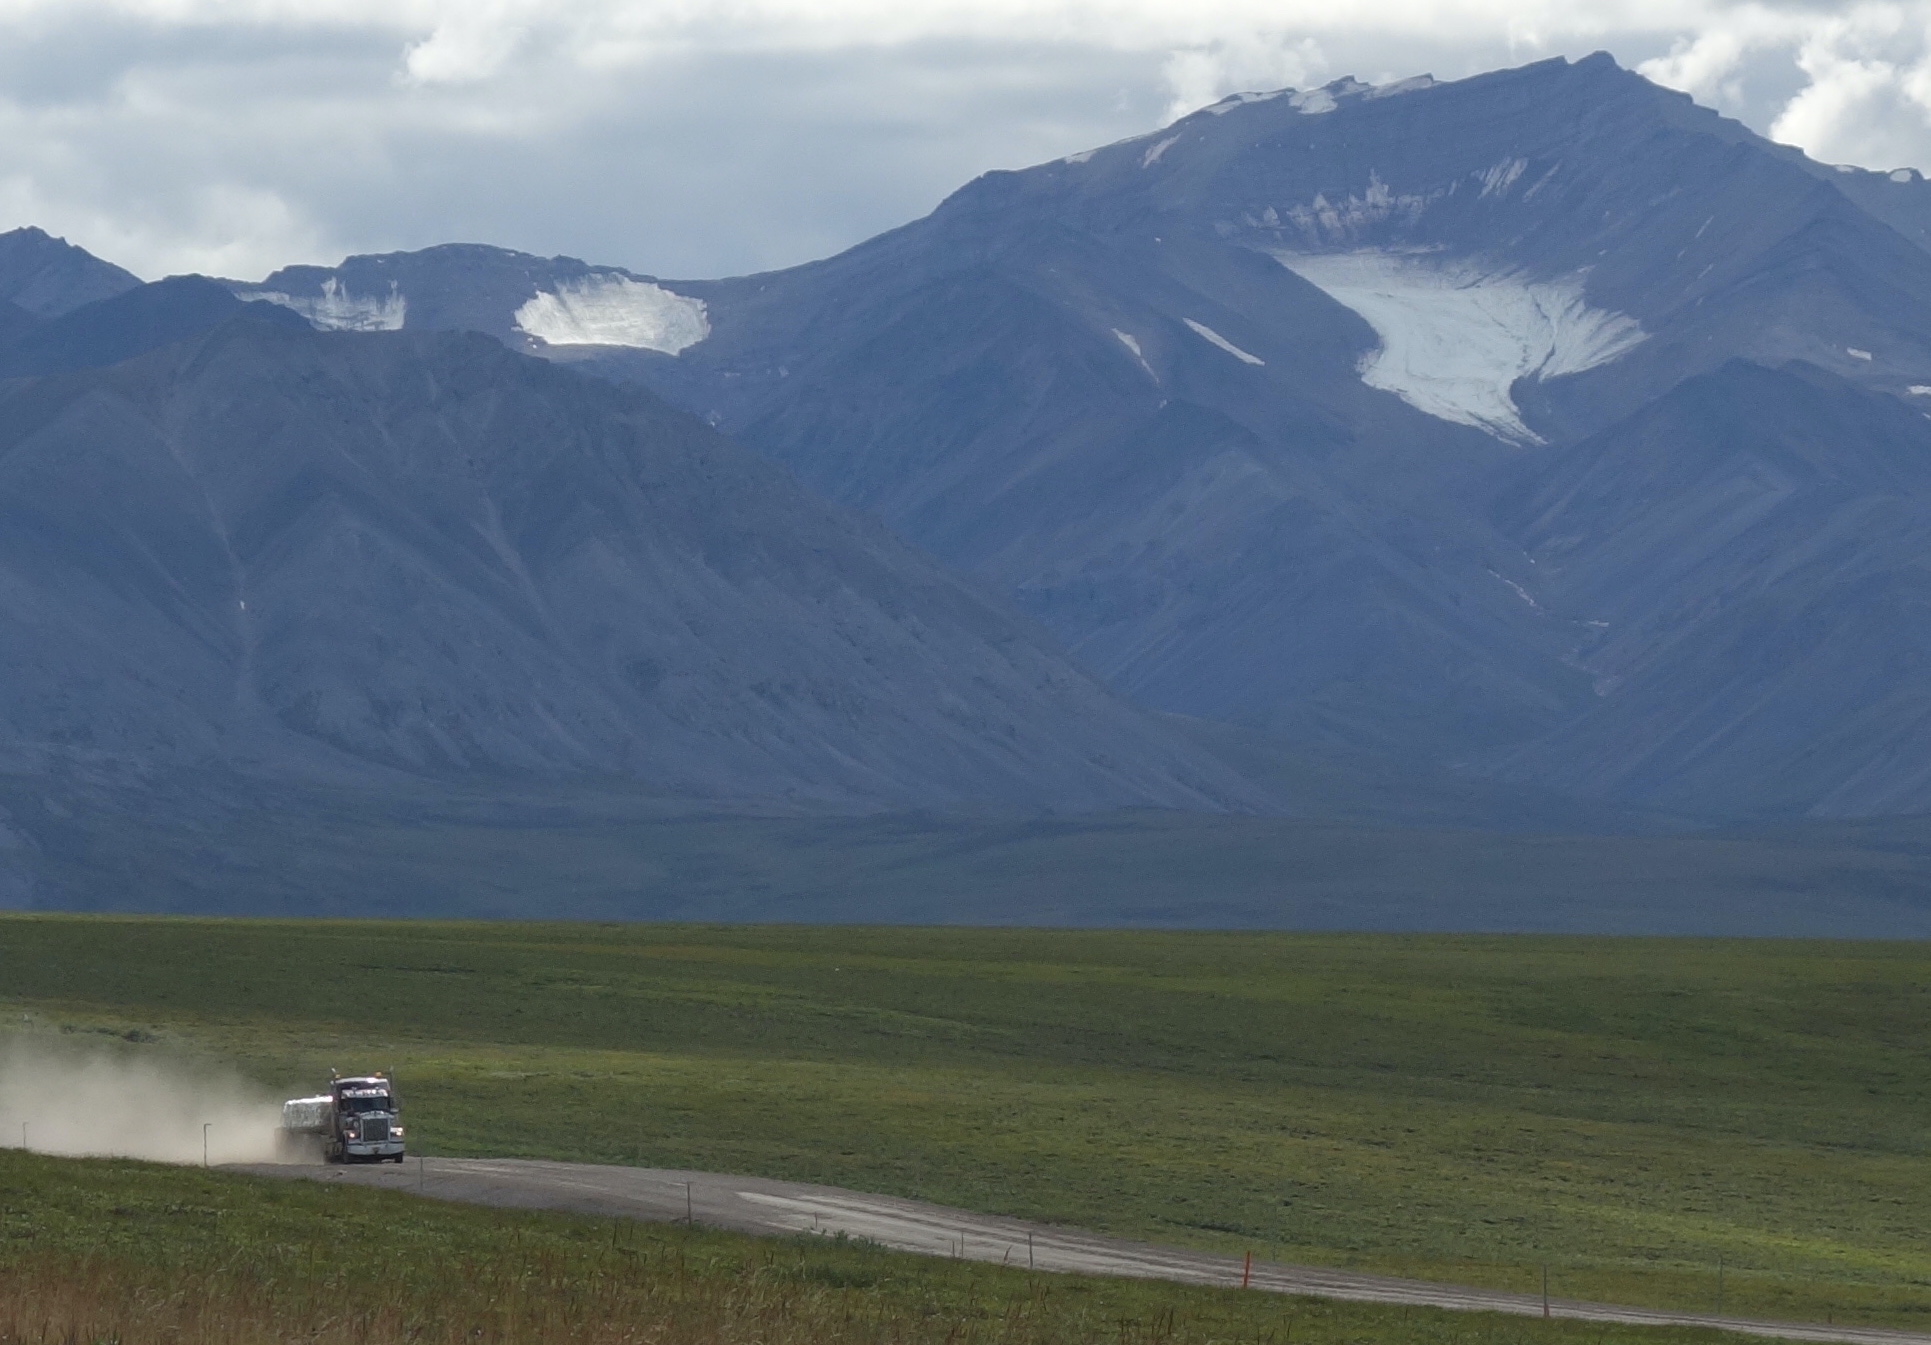 A tractor trailer drives through green tundra with mountains bearing a few small glaciers in the background.